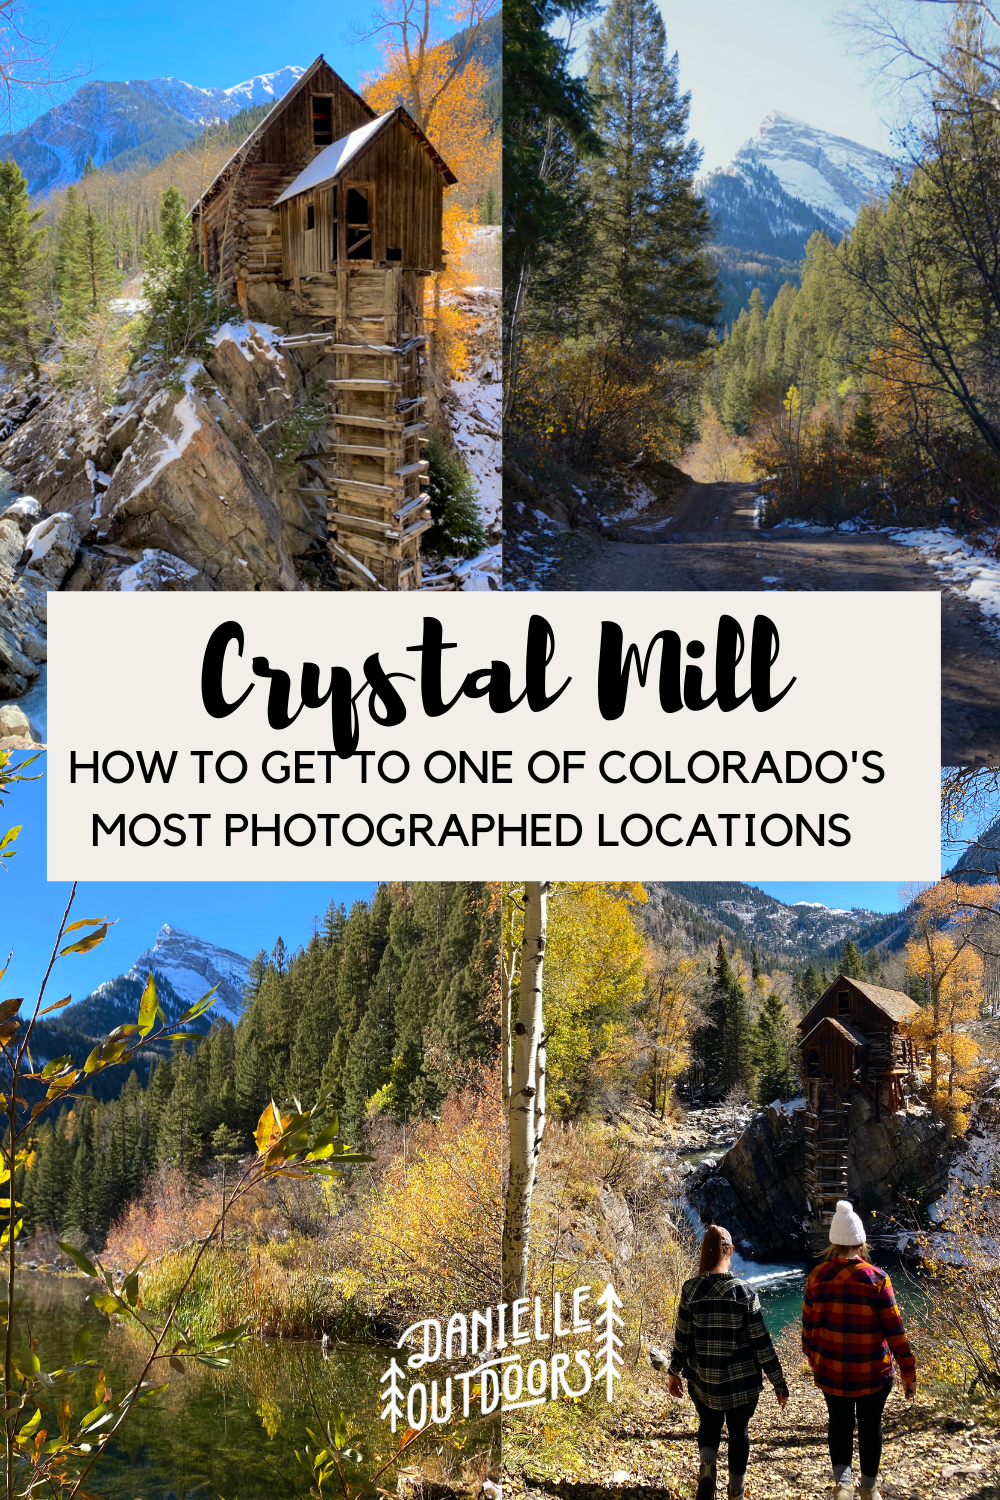 How to Get to Crystal Mill